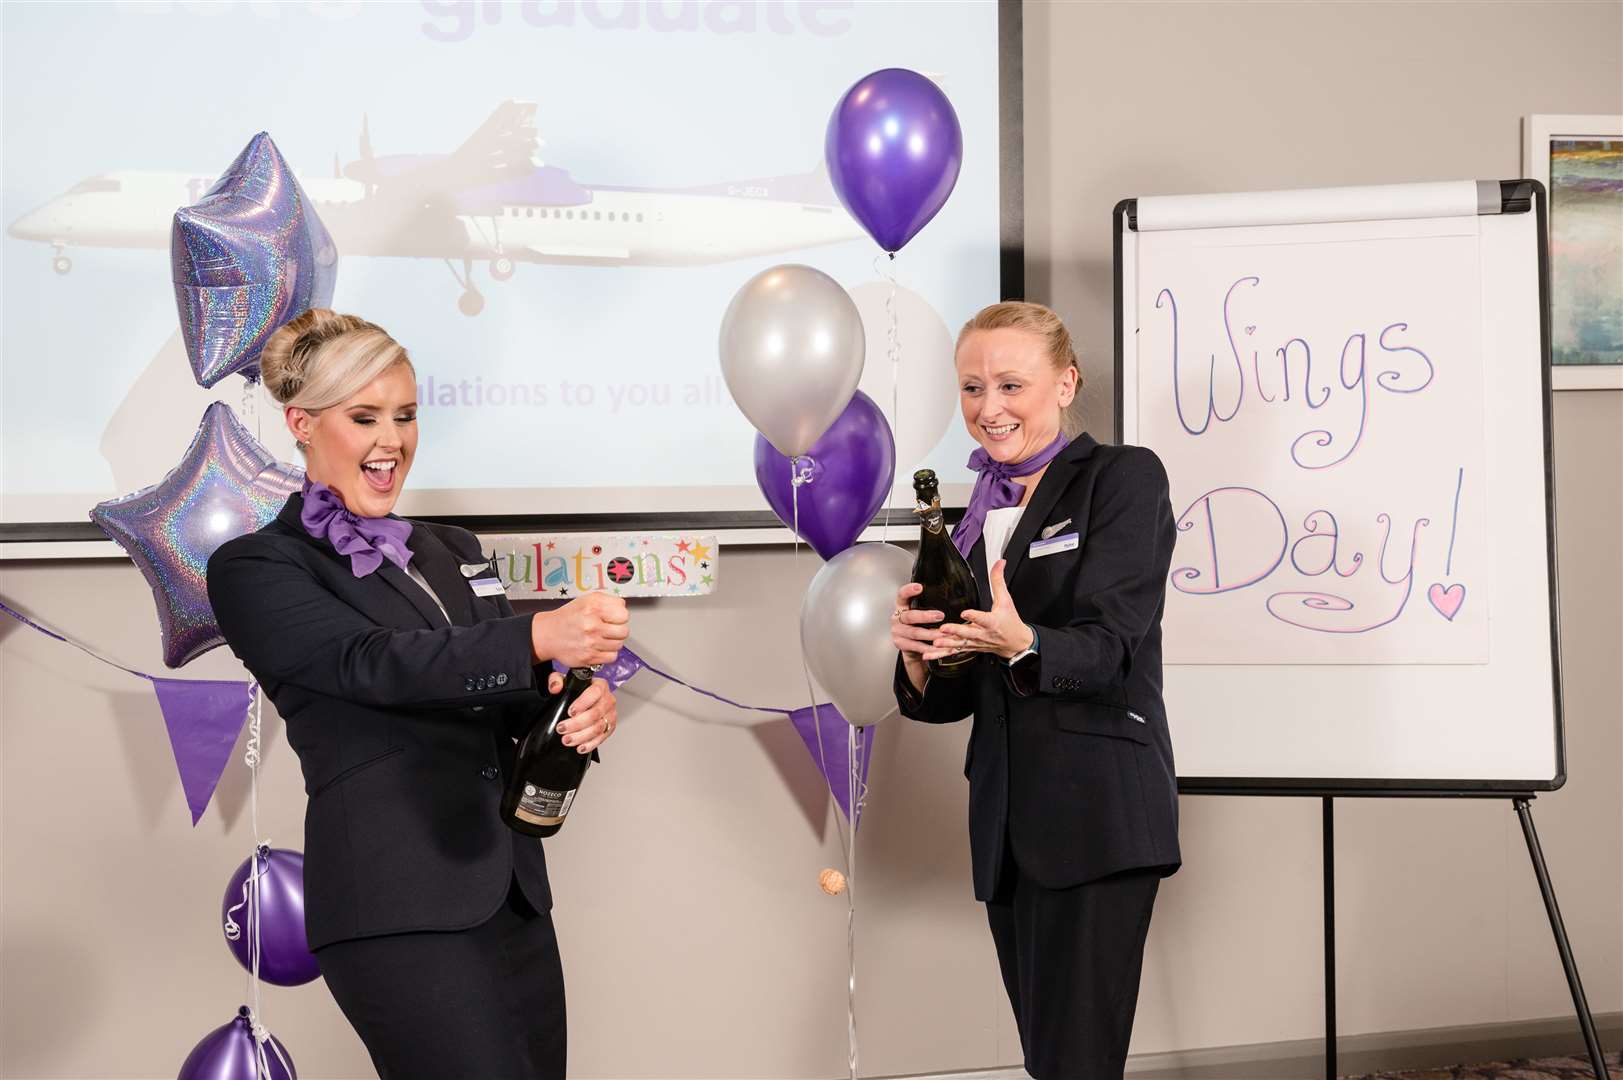 Flybe staff celebrate the launch of the new flights.